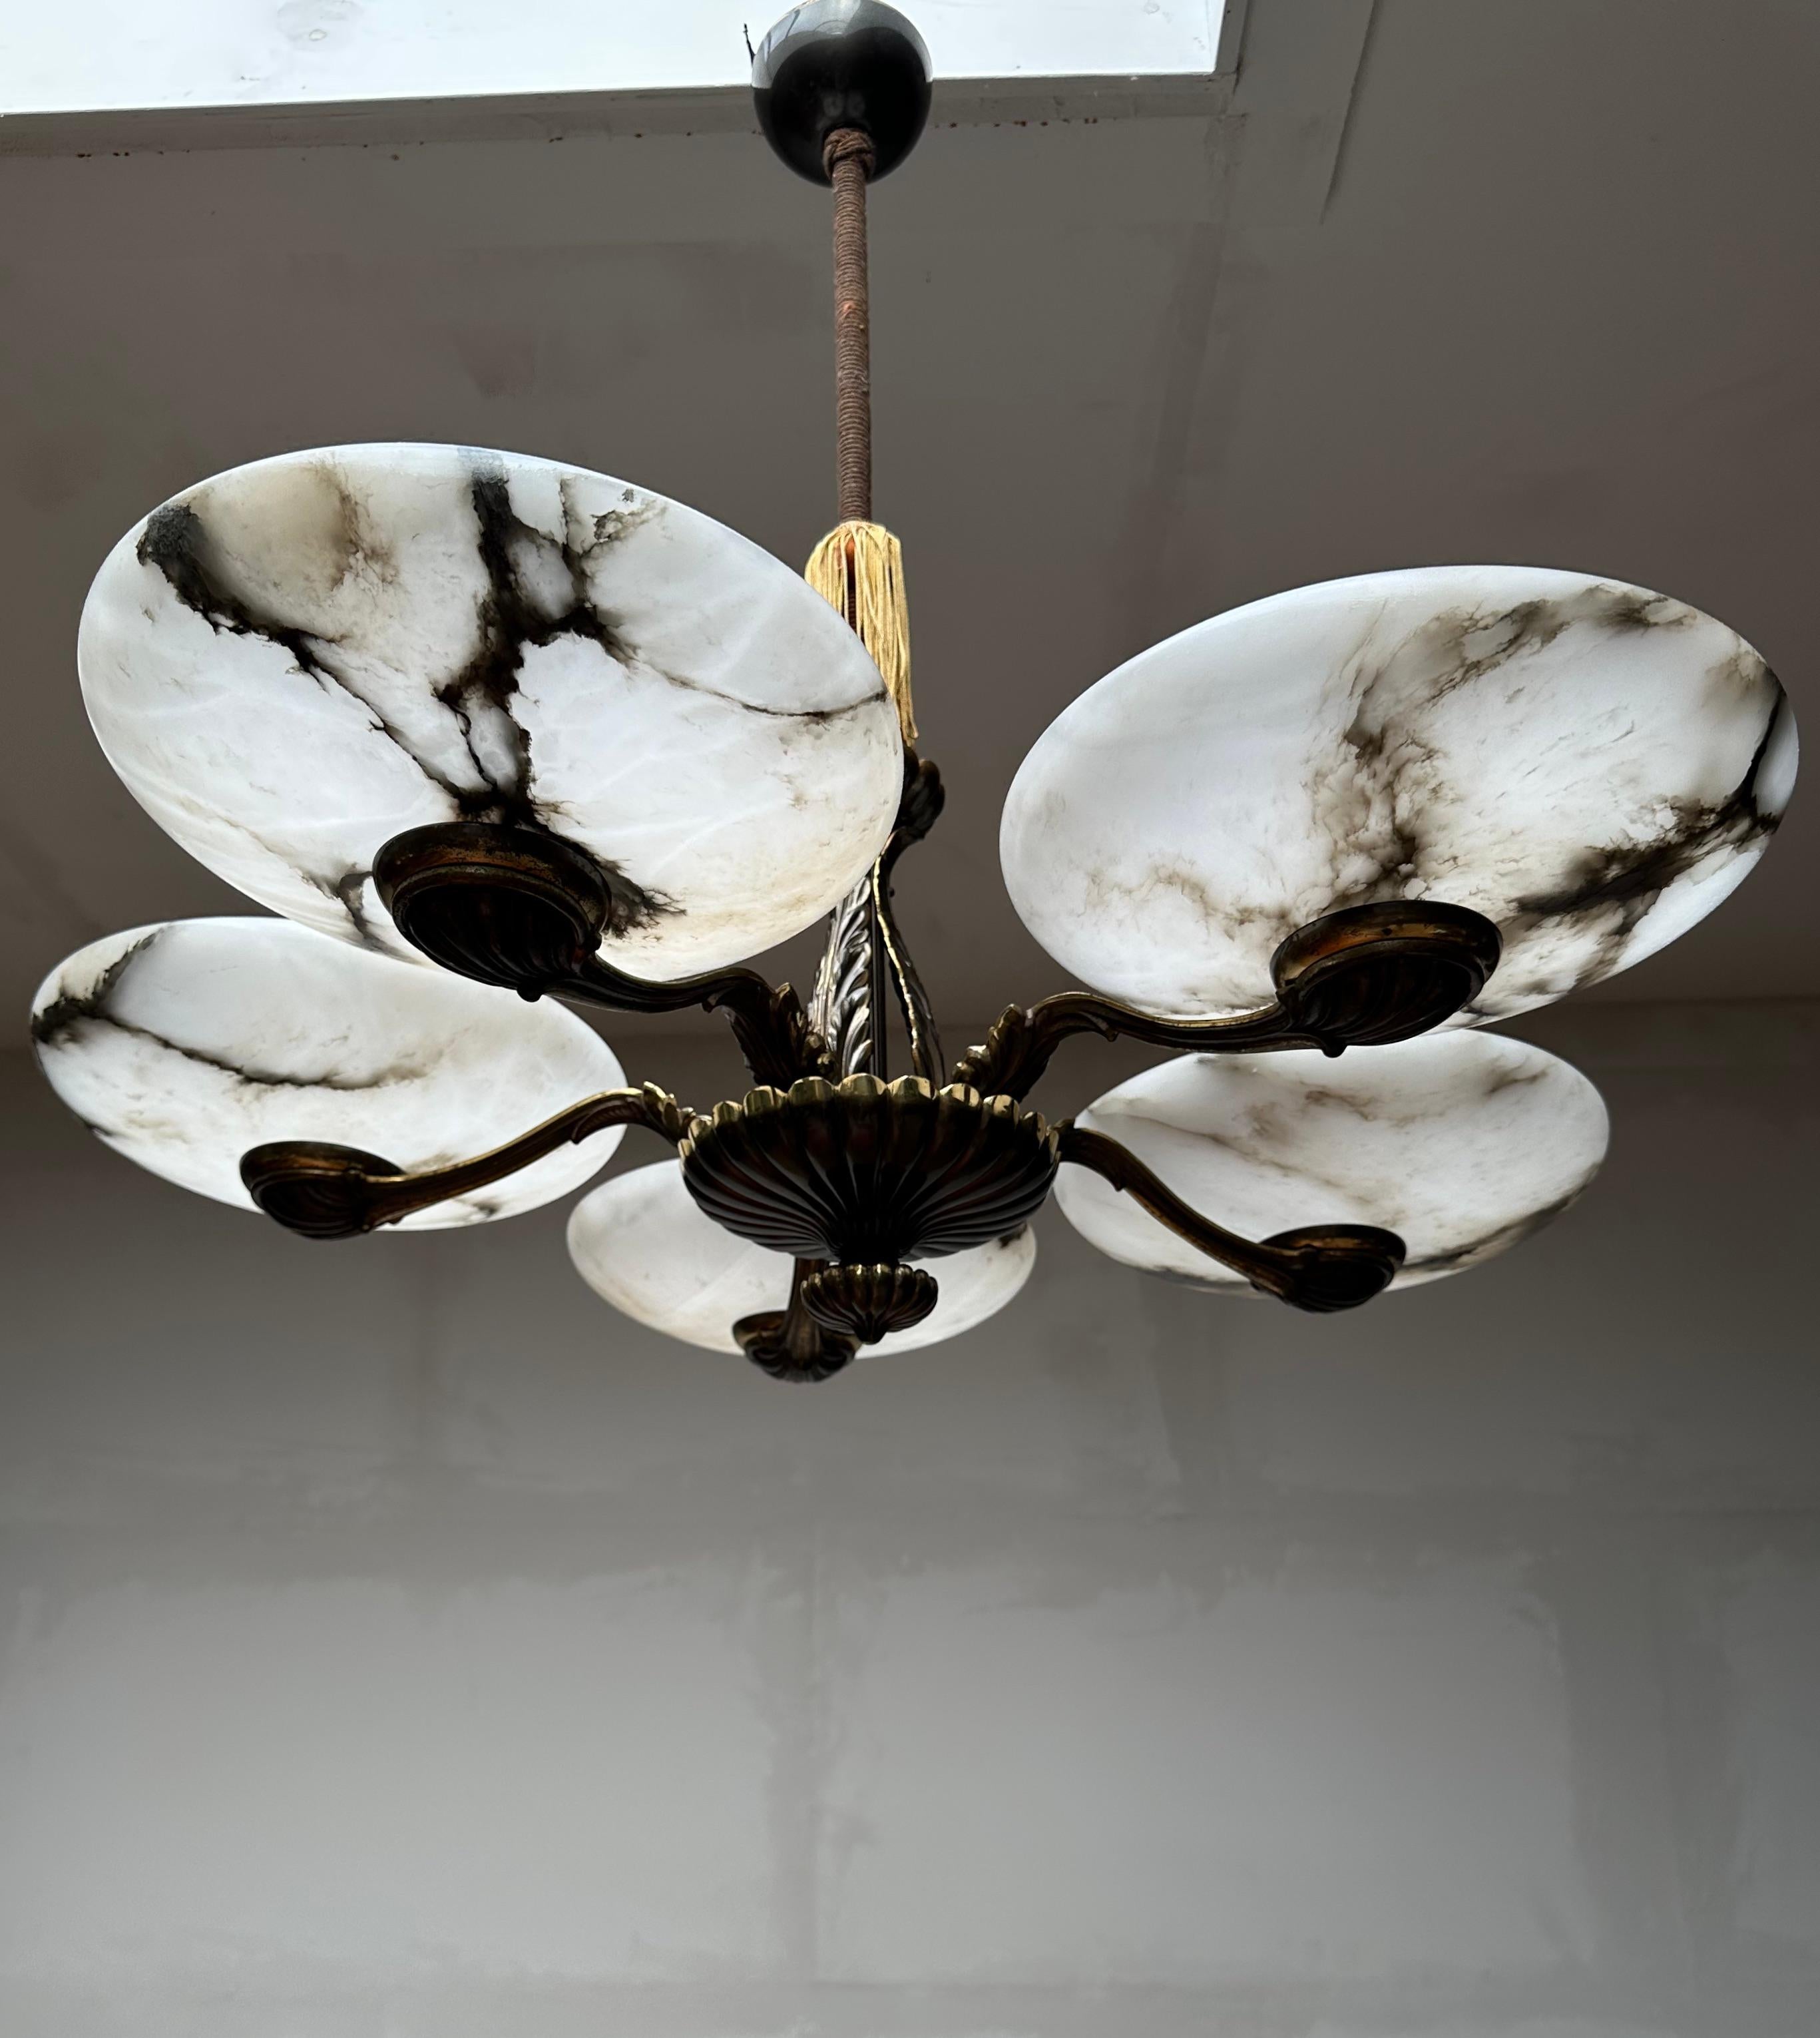 Striking and exclusive 1920s bronze and alabaster light fixture for the perfect atmosphere.

If you are looking for a remarkable light fixture to grace your living space then this antique Art Deco chandelier from the earliest years of the 20th